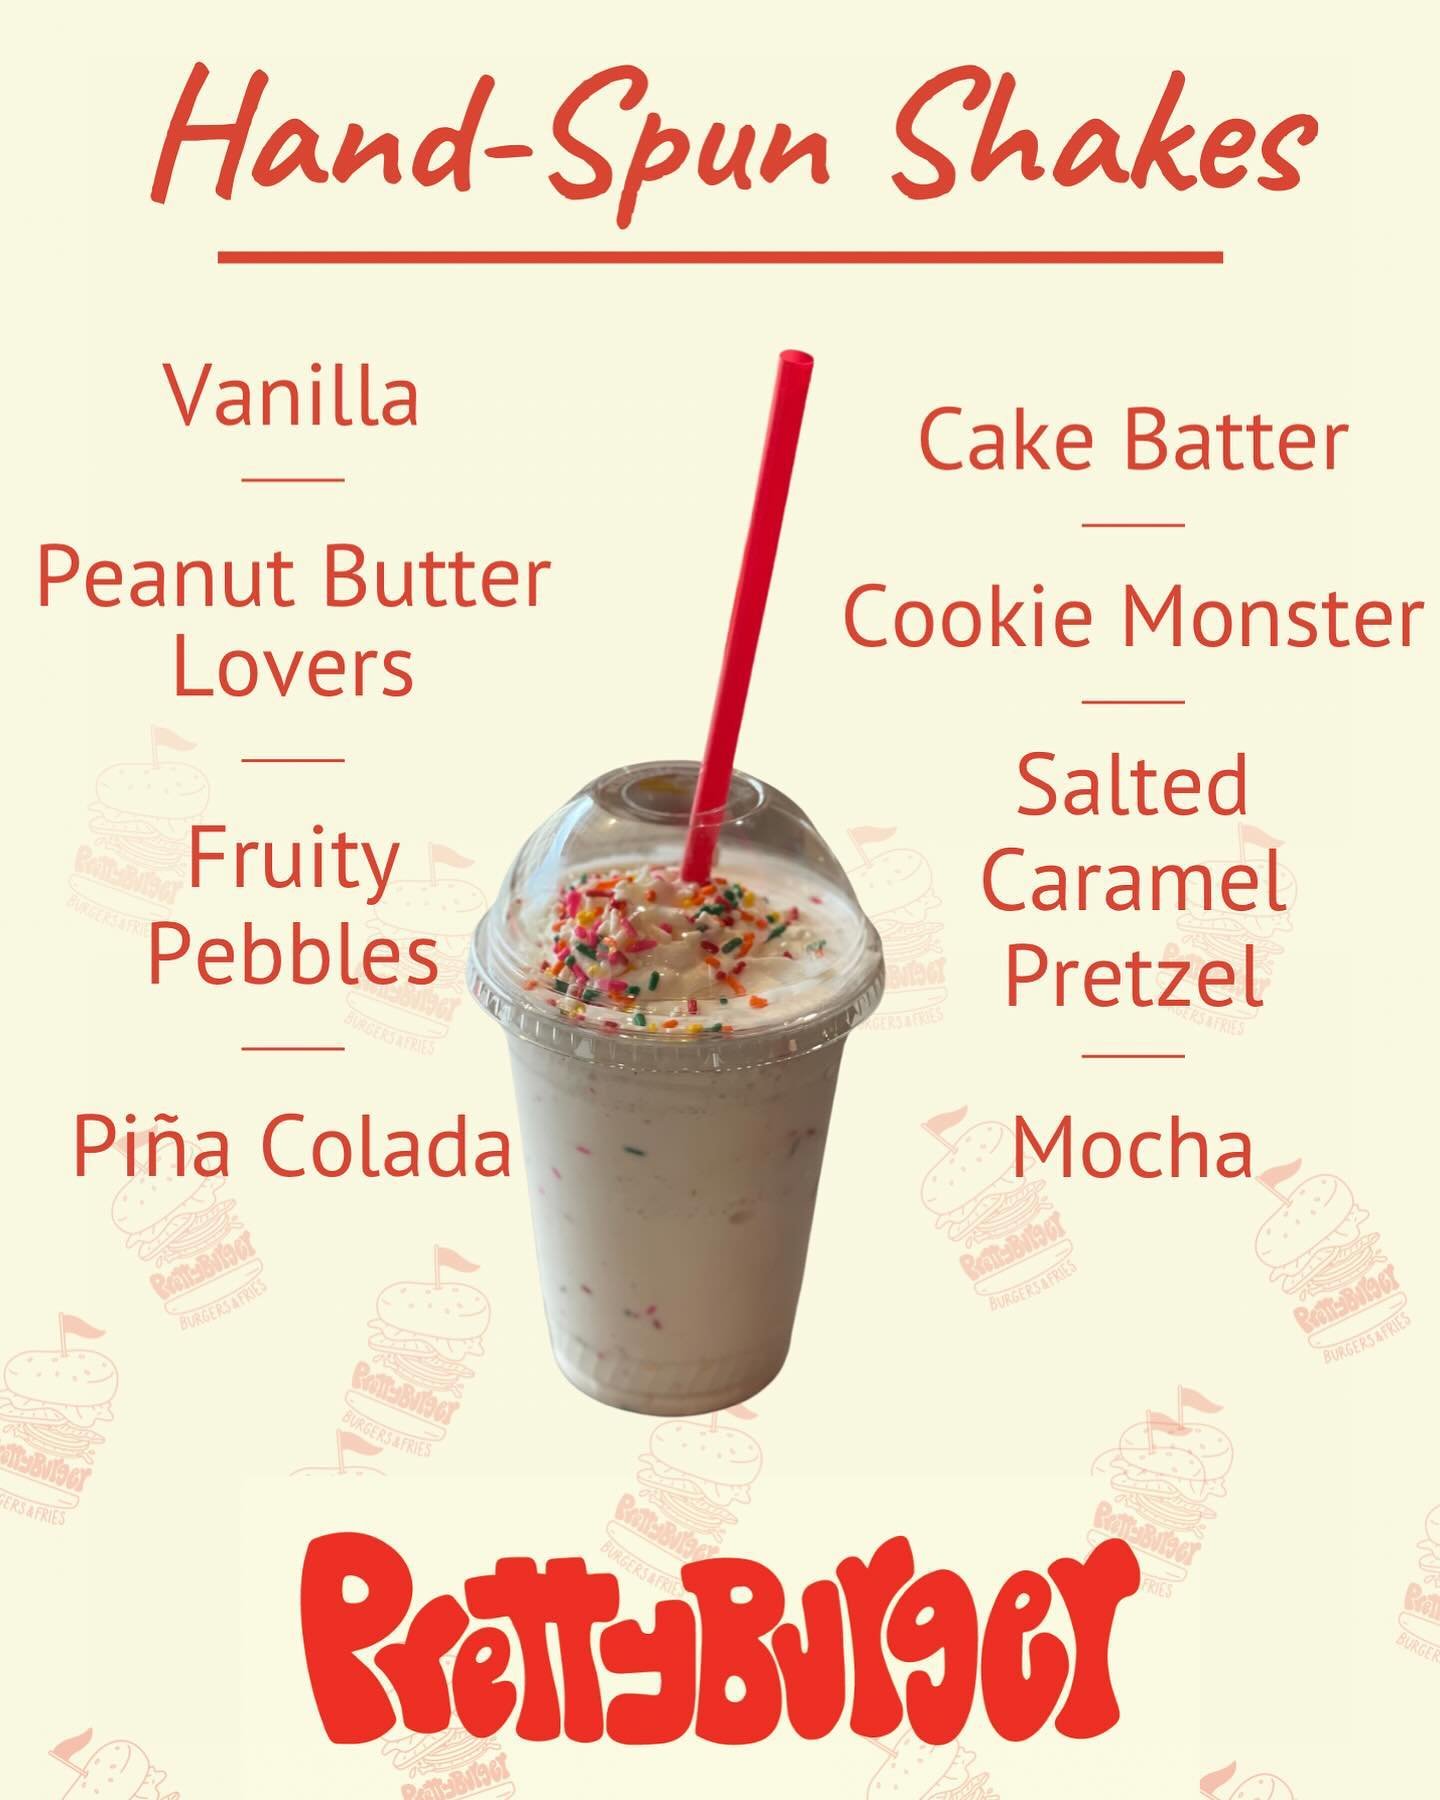 milkshake szn is here 🙌

which are you ordering today ⬇️

#milkshake #milkshakes #shake #shakeshakeshake #burger #burgerporn #burgerlover #burgertime #burgerlovers #burgerlife #burgerjoint #burgergram #burgers #burgershack #burgersandfries #burgerso